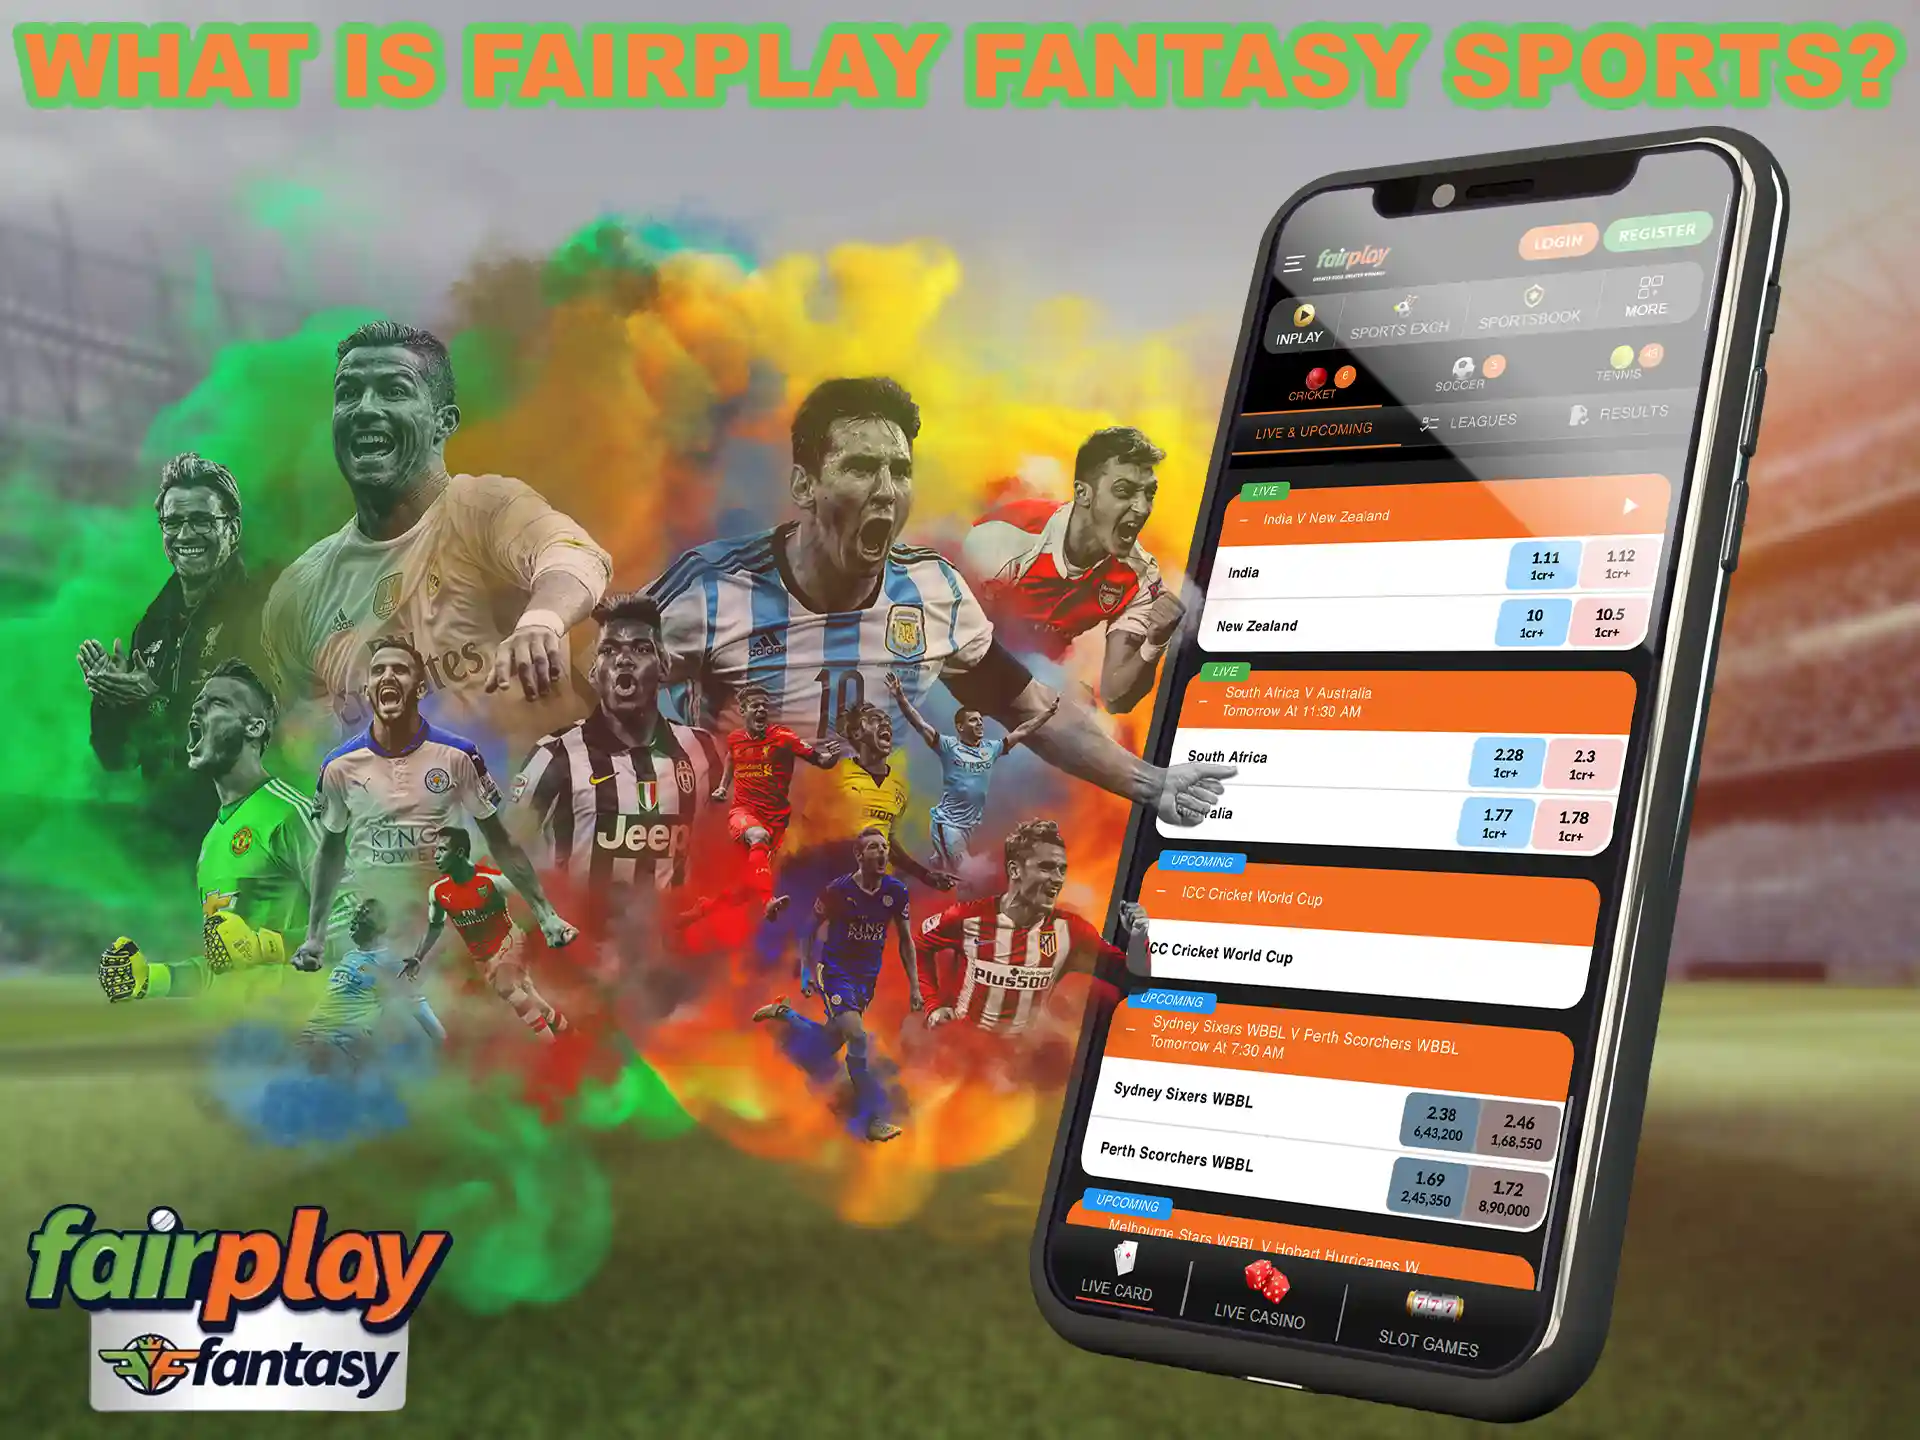 Create your own teams in Fairplay Fantasy Sports and compete against other players.